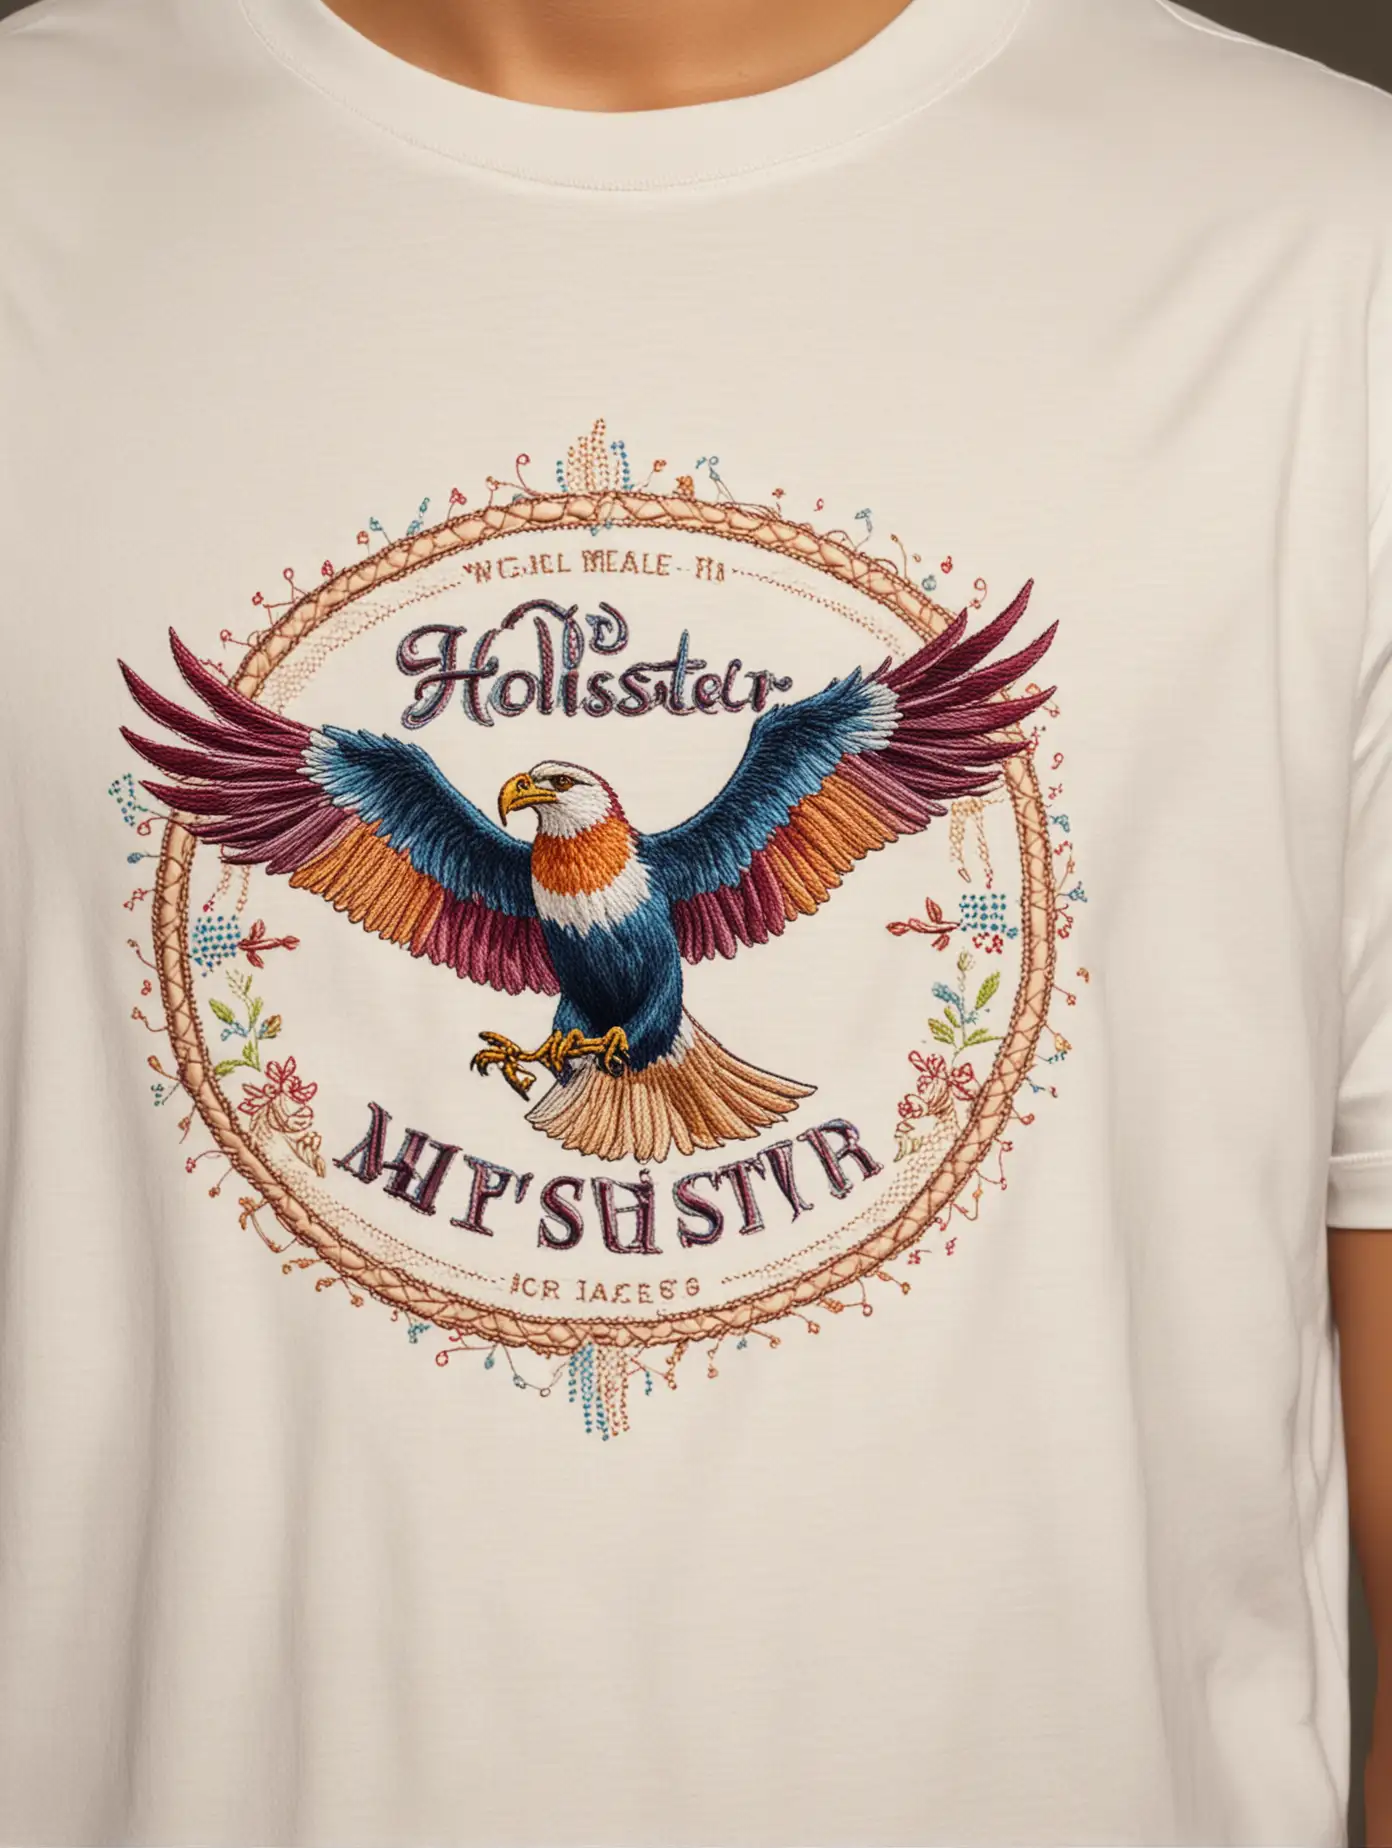 embroidery design of the Hollister Brand Logo done in outlines in the style of a western embroidery art applied to the front of a white loose-fitting tee shirt, using thread only no paint, very faded colors, full frontal view perspective